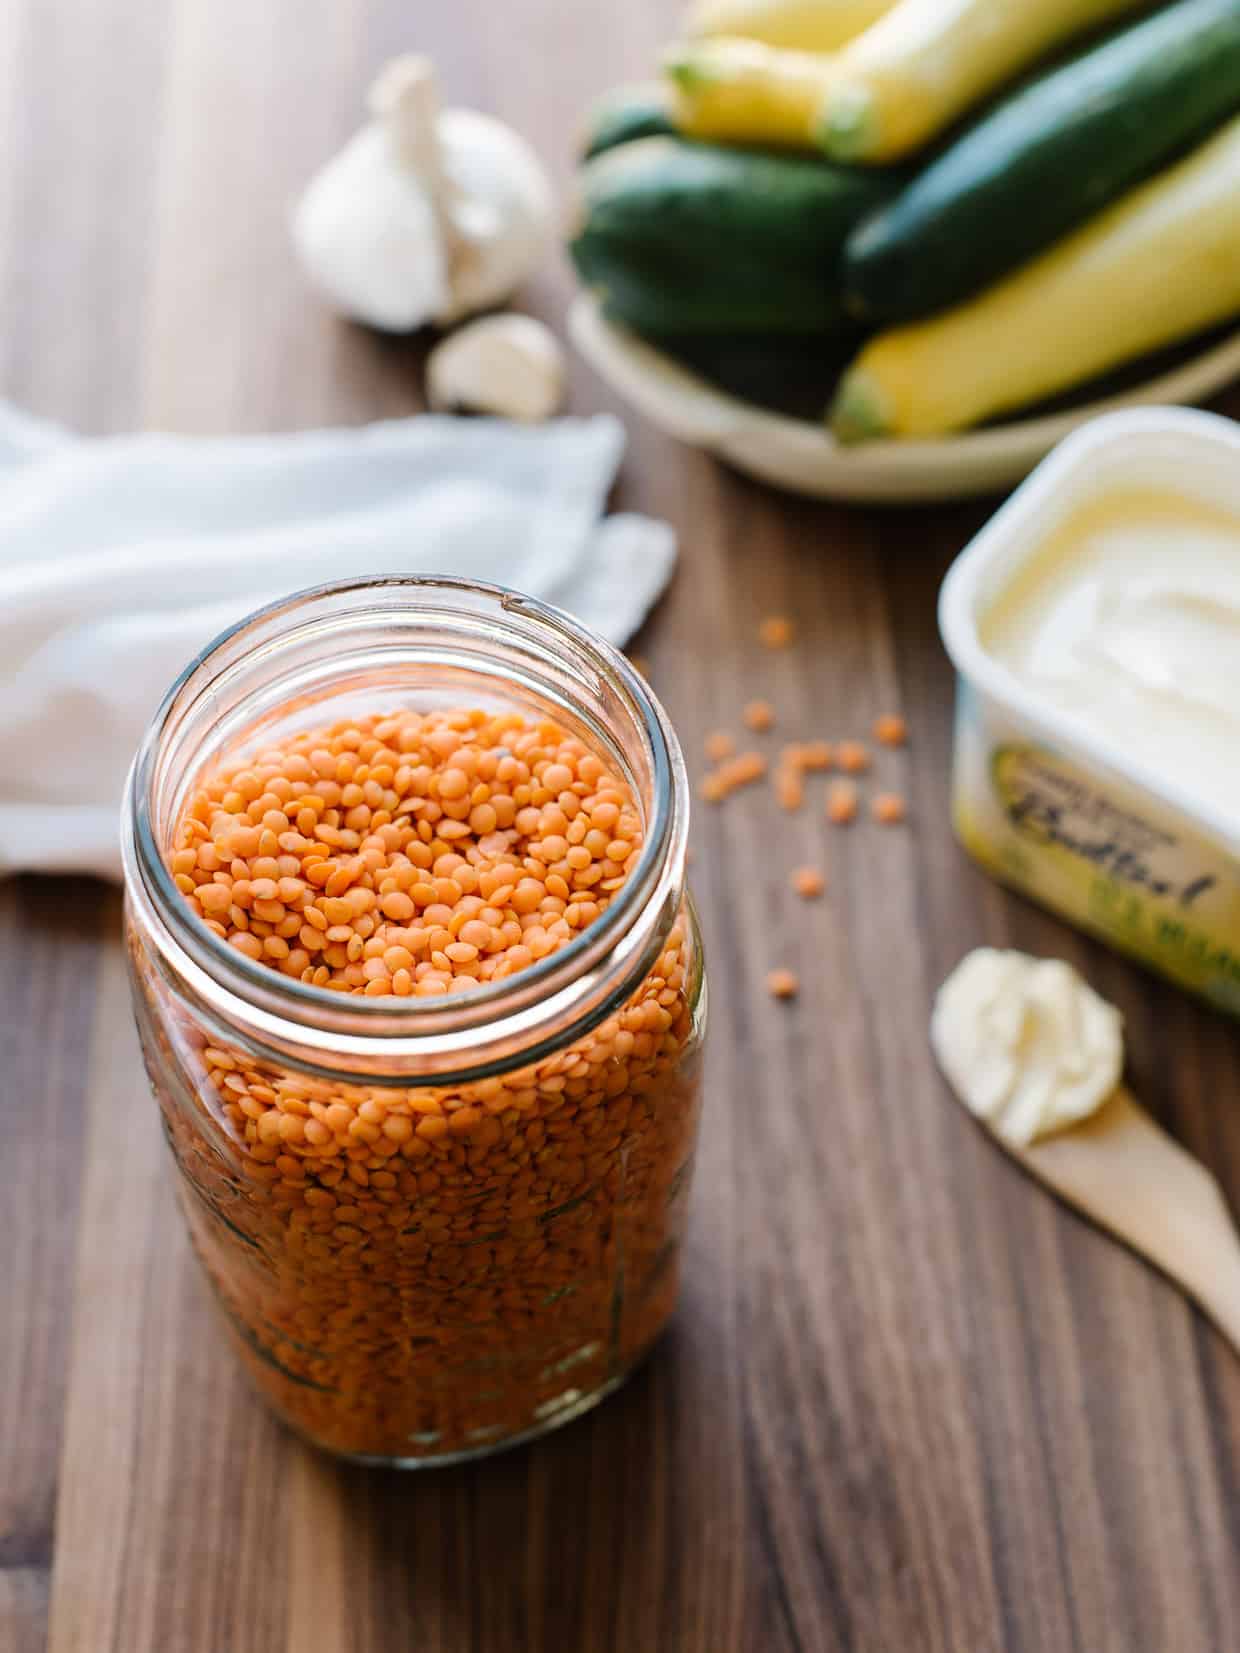 A jar of red lentils with zucchini and summer squash in the background.